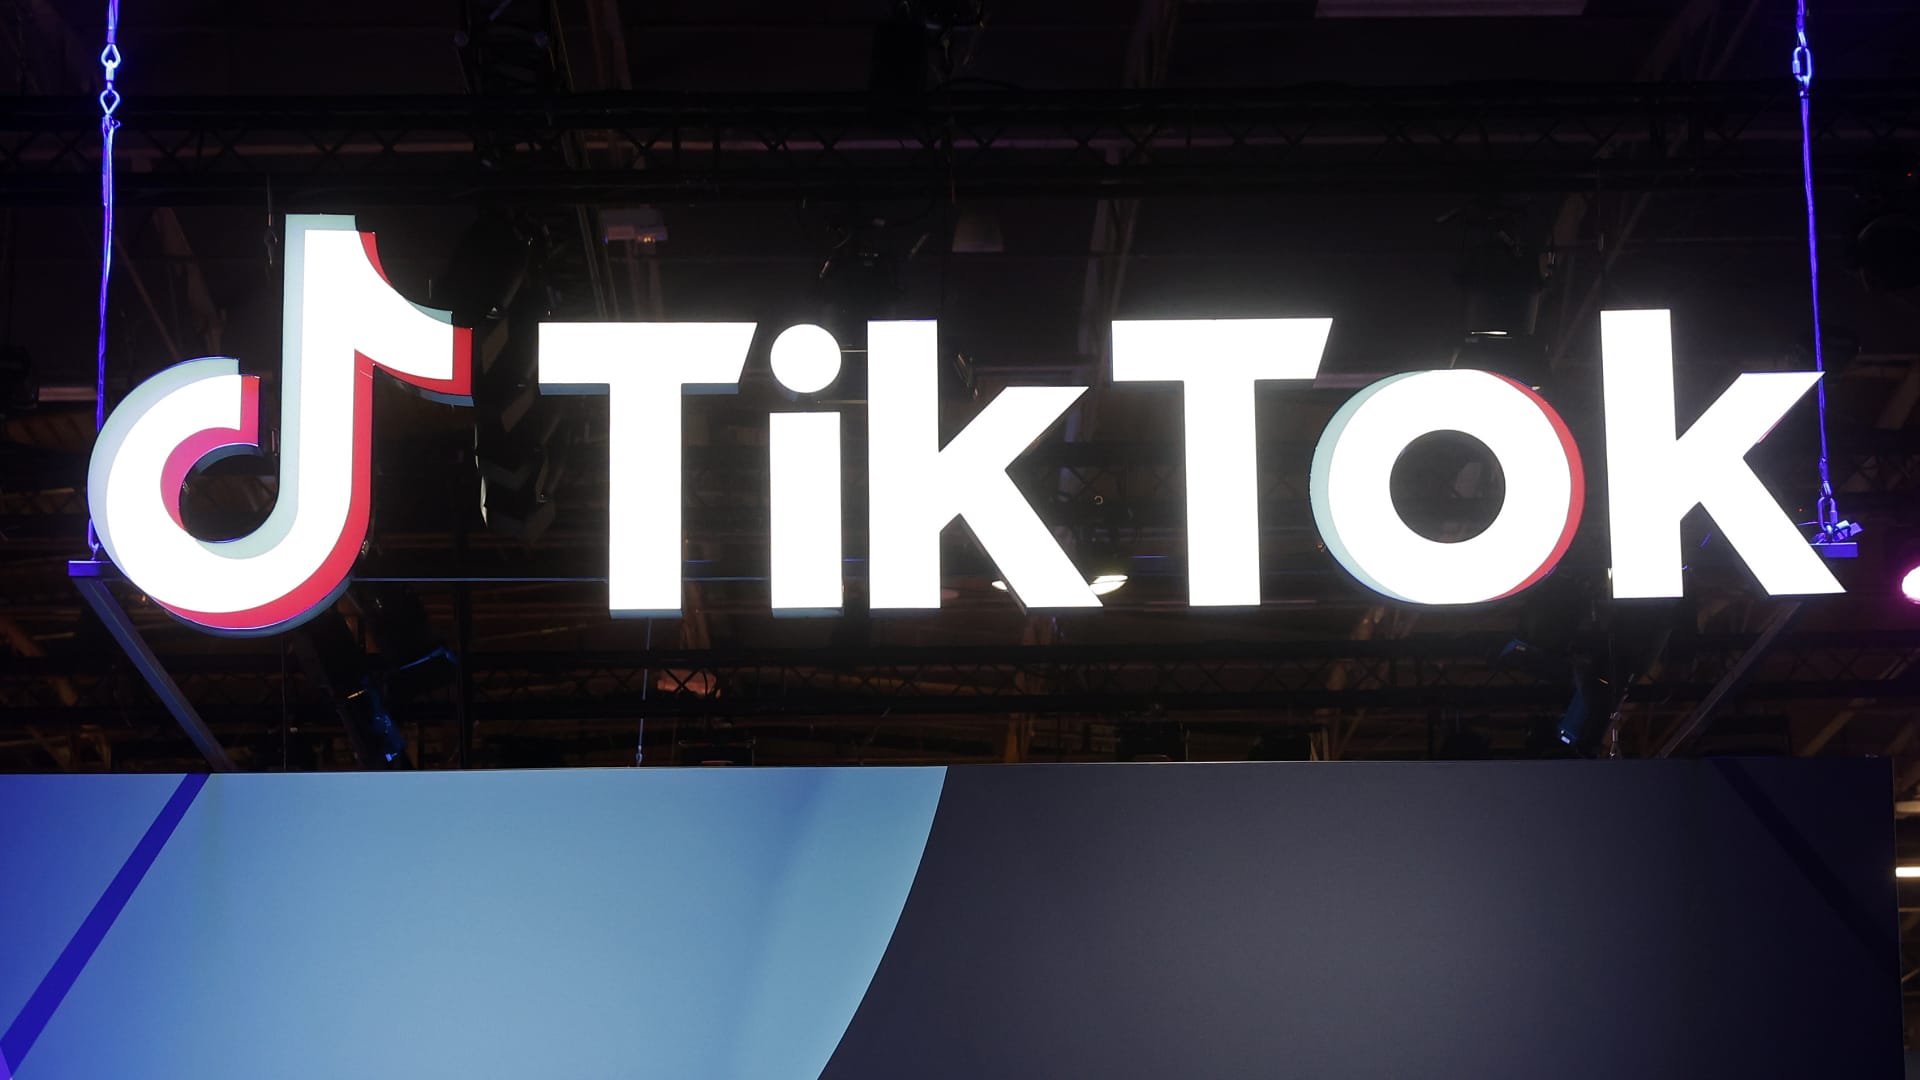 PARIS, FRANCE - NOVEMBER 01: The logo of the mobile video sharing and social networking application TikTok, developed by the Chinese company ByteDance is displayed during Paris Games Week 2022 at Parc des Expositions Porte de Versailles on November 01, 2022 in Paris, France. After two years of absence linked to the Covid-19 pandemic, Paris Games Week is making a comeback in Paris. The event celebrating video games and esports will be held from November 2 to 6, 2022. (Photo by Chesnot/Getty Images)